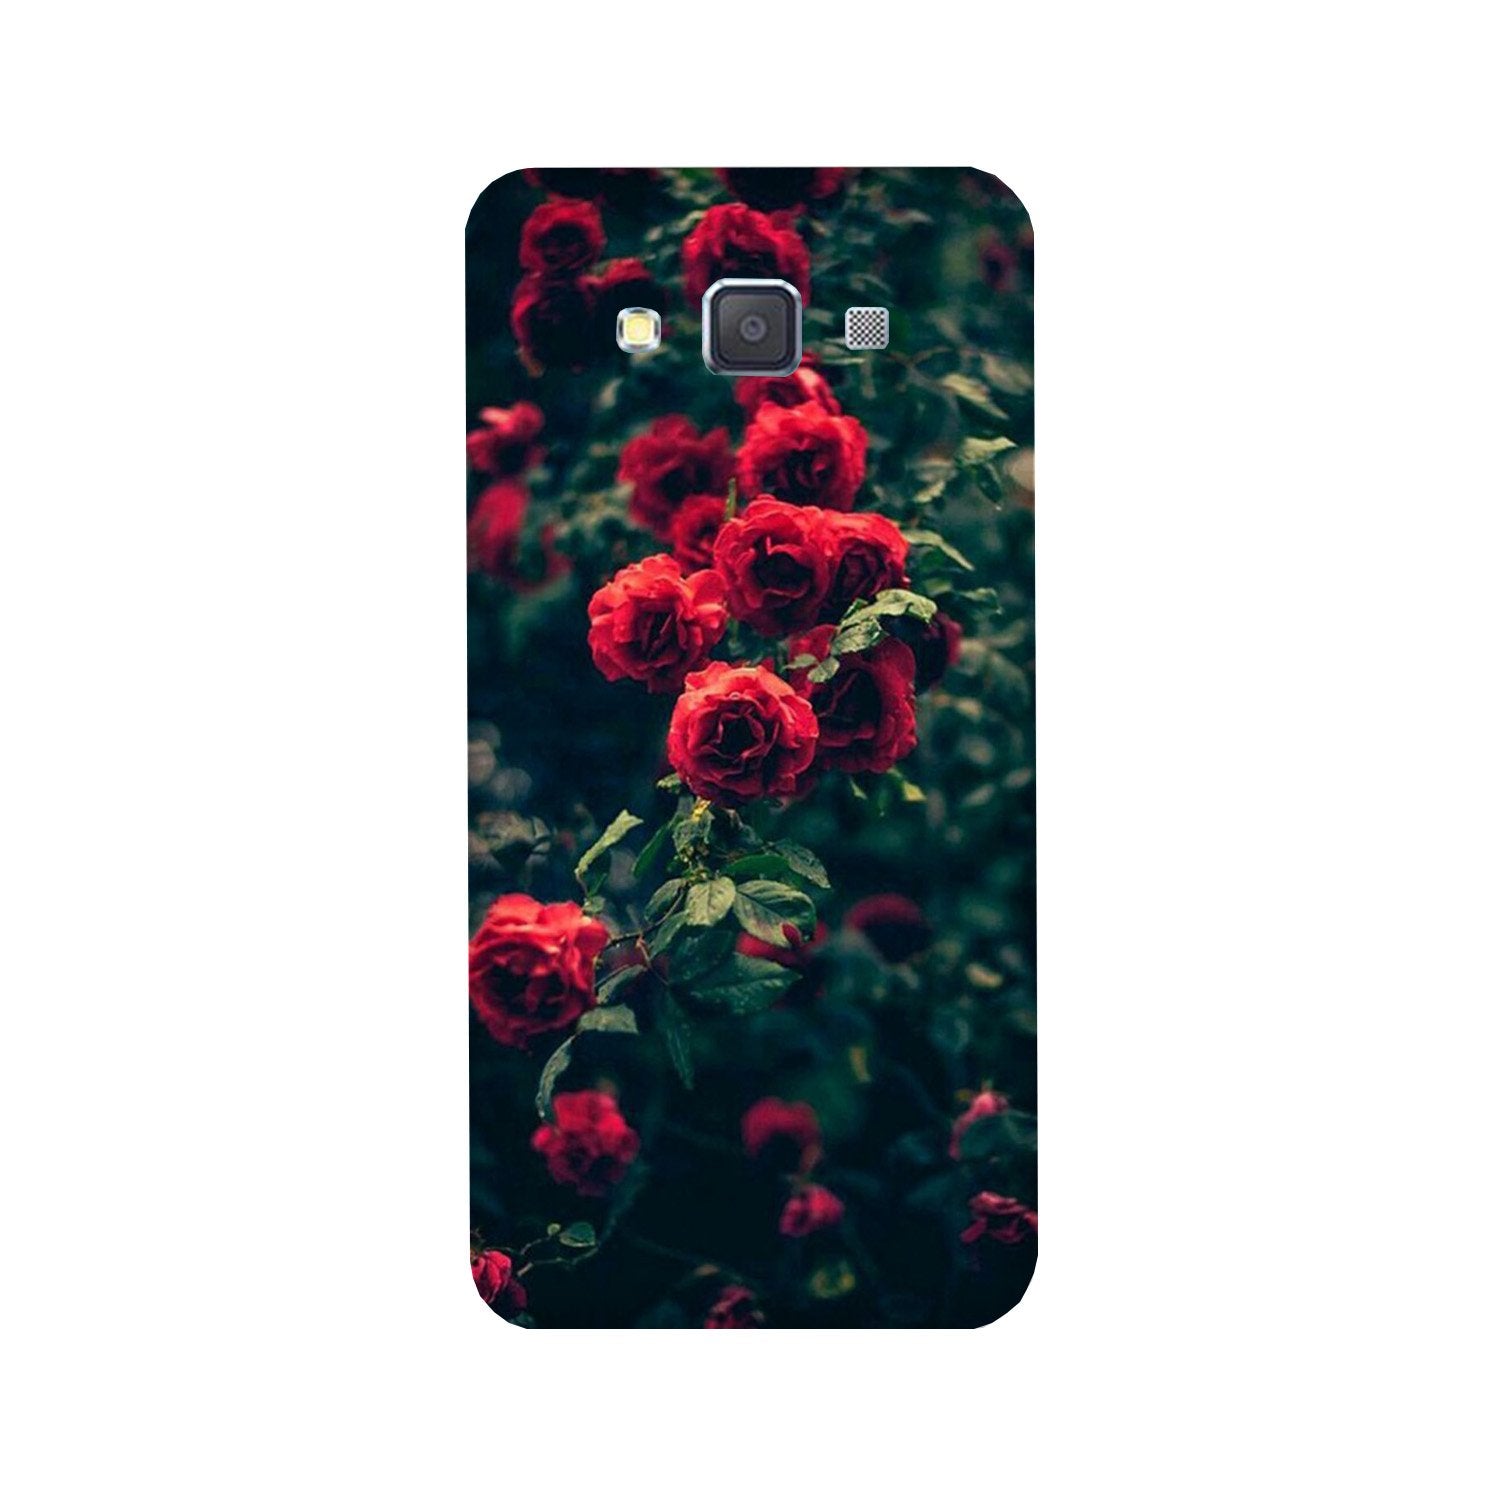 Red Rose Case for Galaxy J7 (2016)